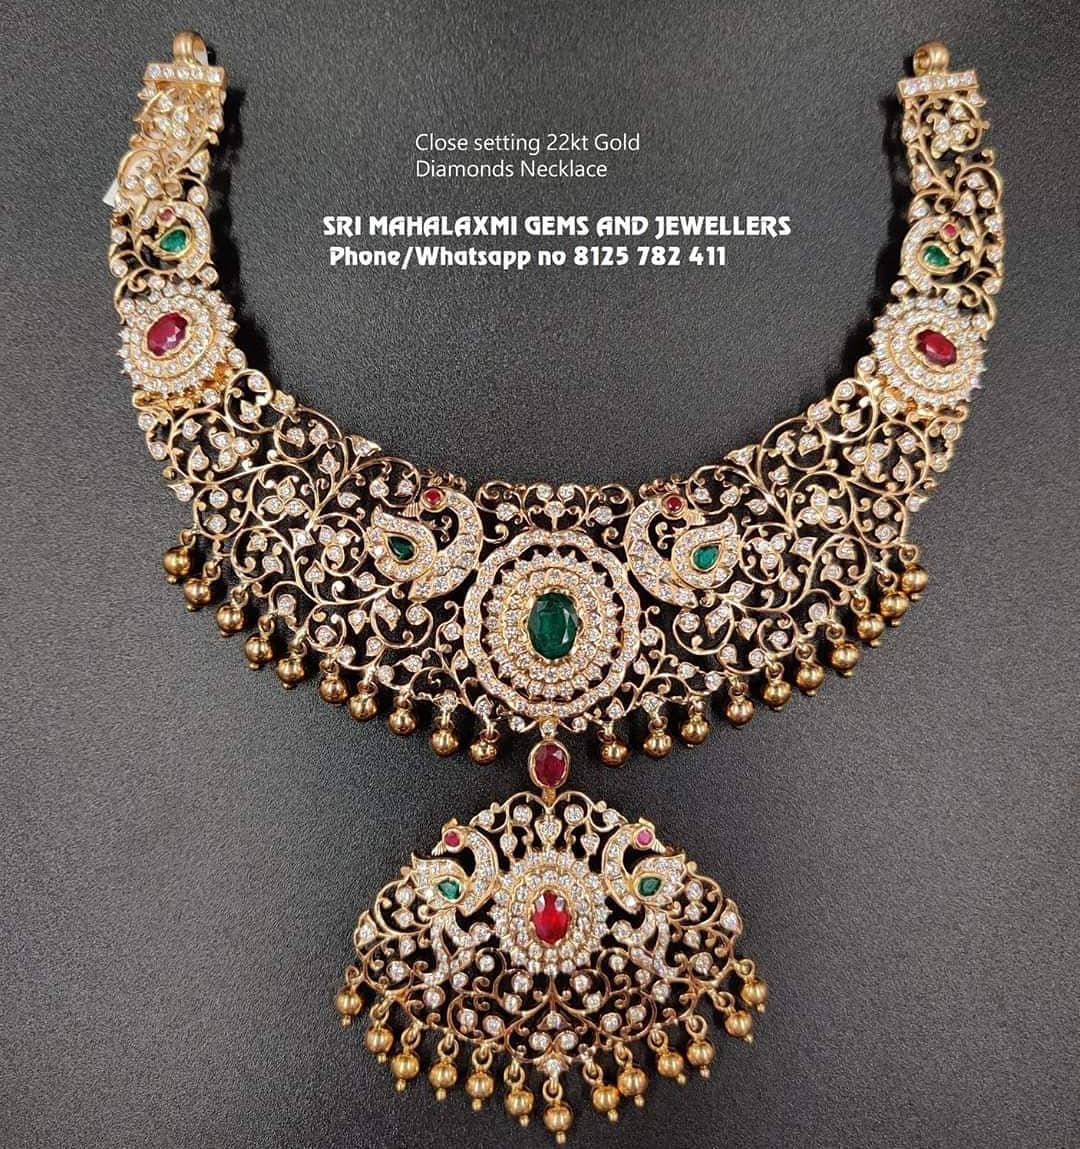 Navrathan Jewellers - A Precious close setting Diamond Necklace making  Customer's Style Sensational. #Navrathan #diamondnecklace #necklace  #DiamondJewellery #ExquisiteDiamondJewellery #DiamondHeritage #Jewellery  #DiamondEleganace #DiamondJewels ...